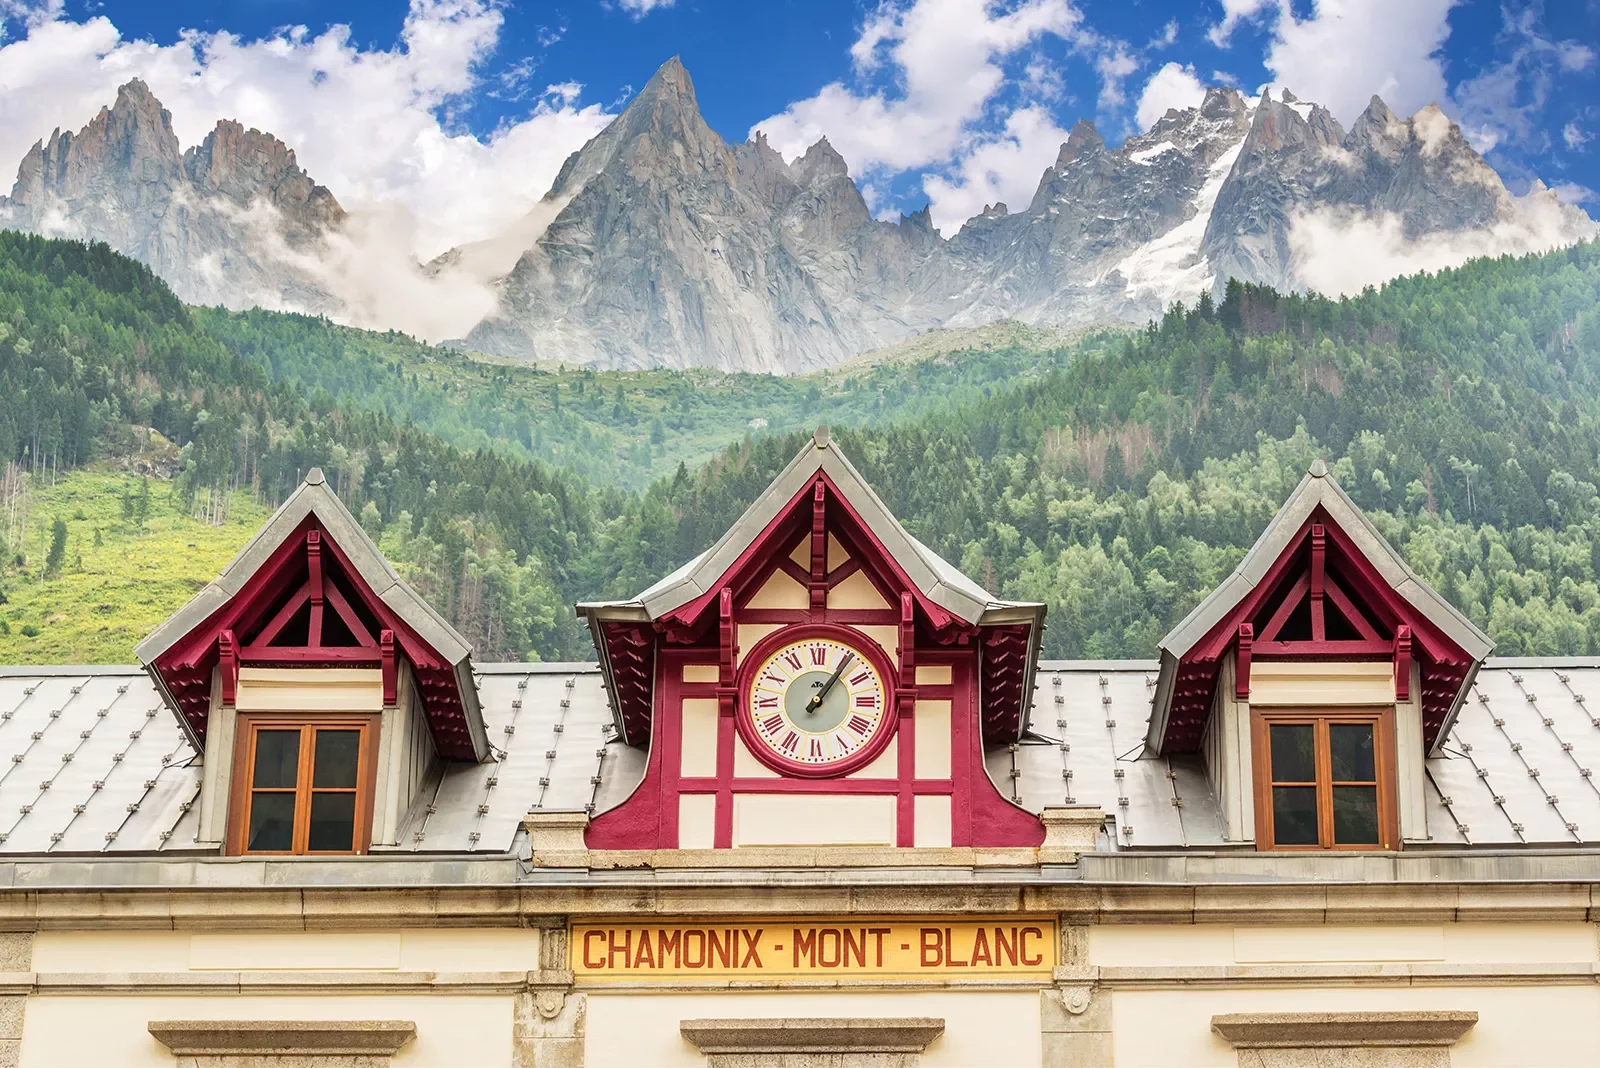 Train station clock at Chamonix Mont-Blanc, mountain in distance.